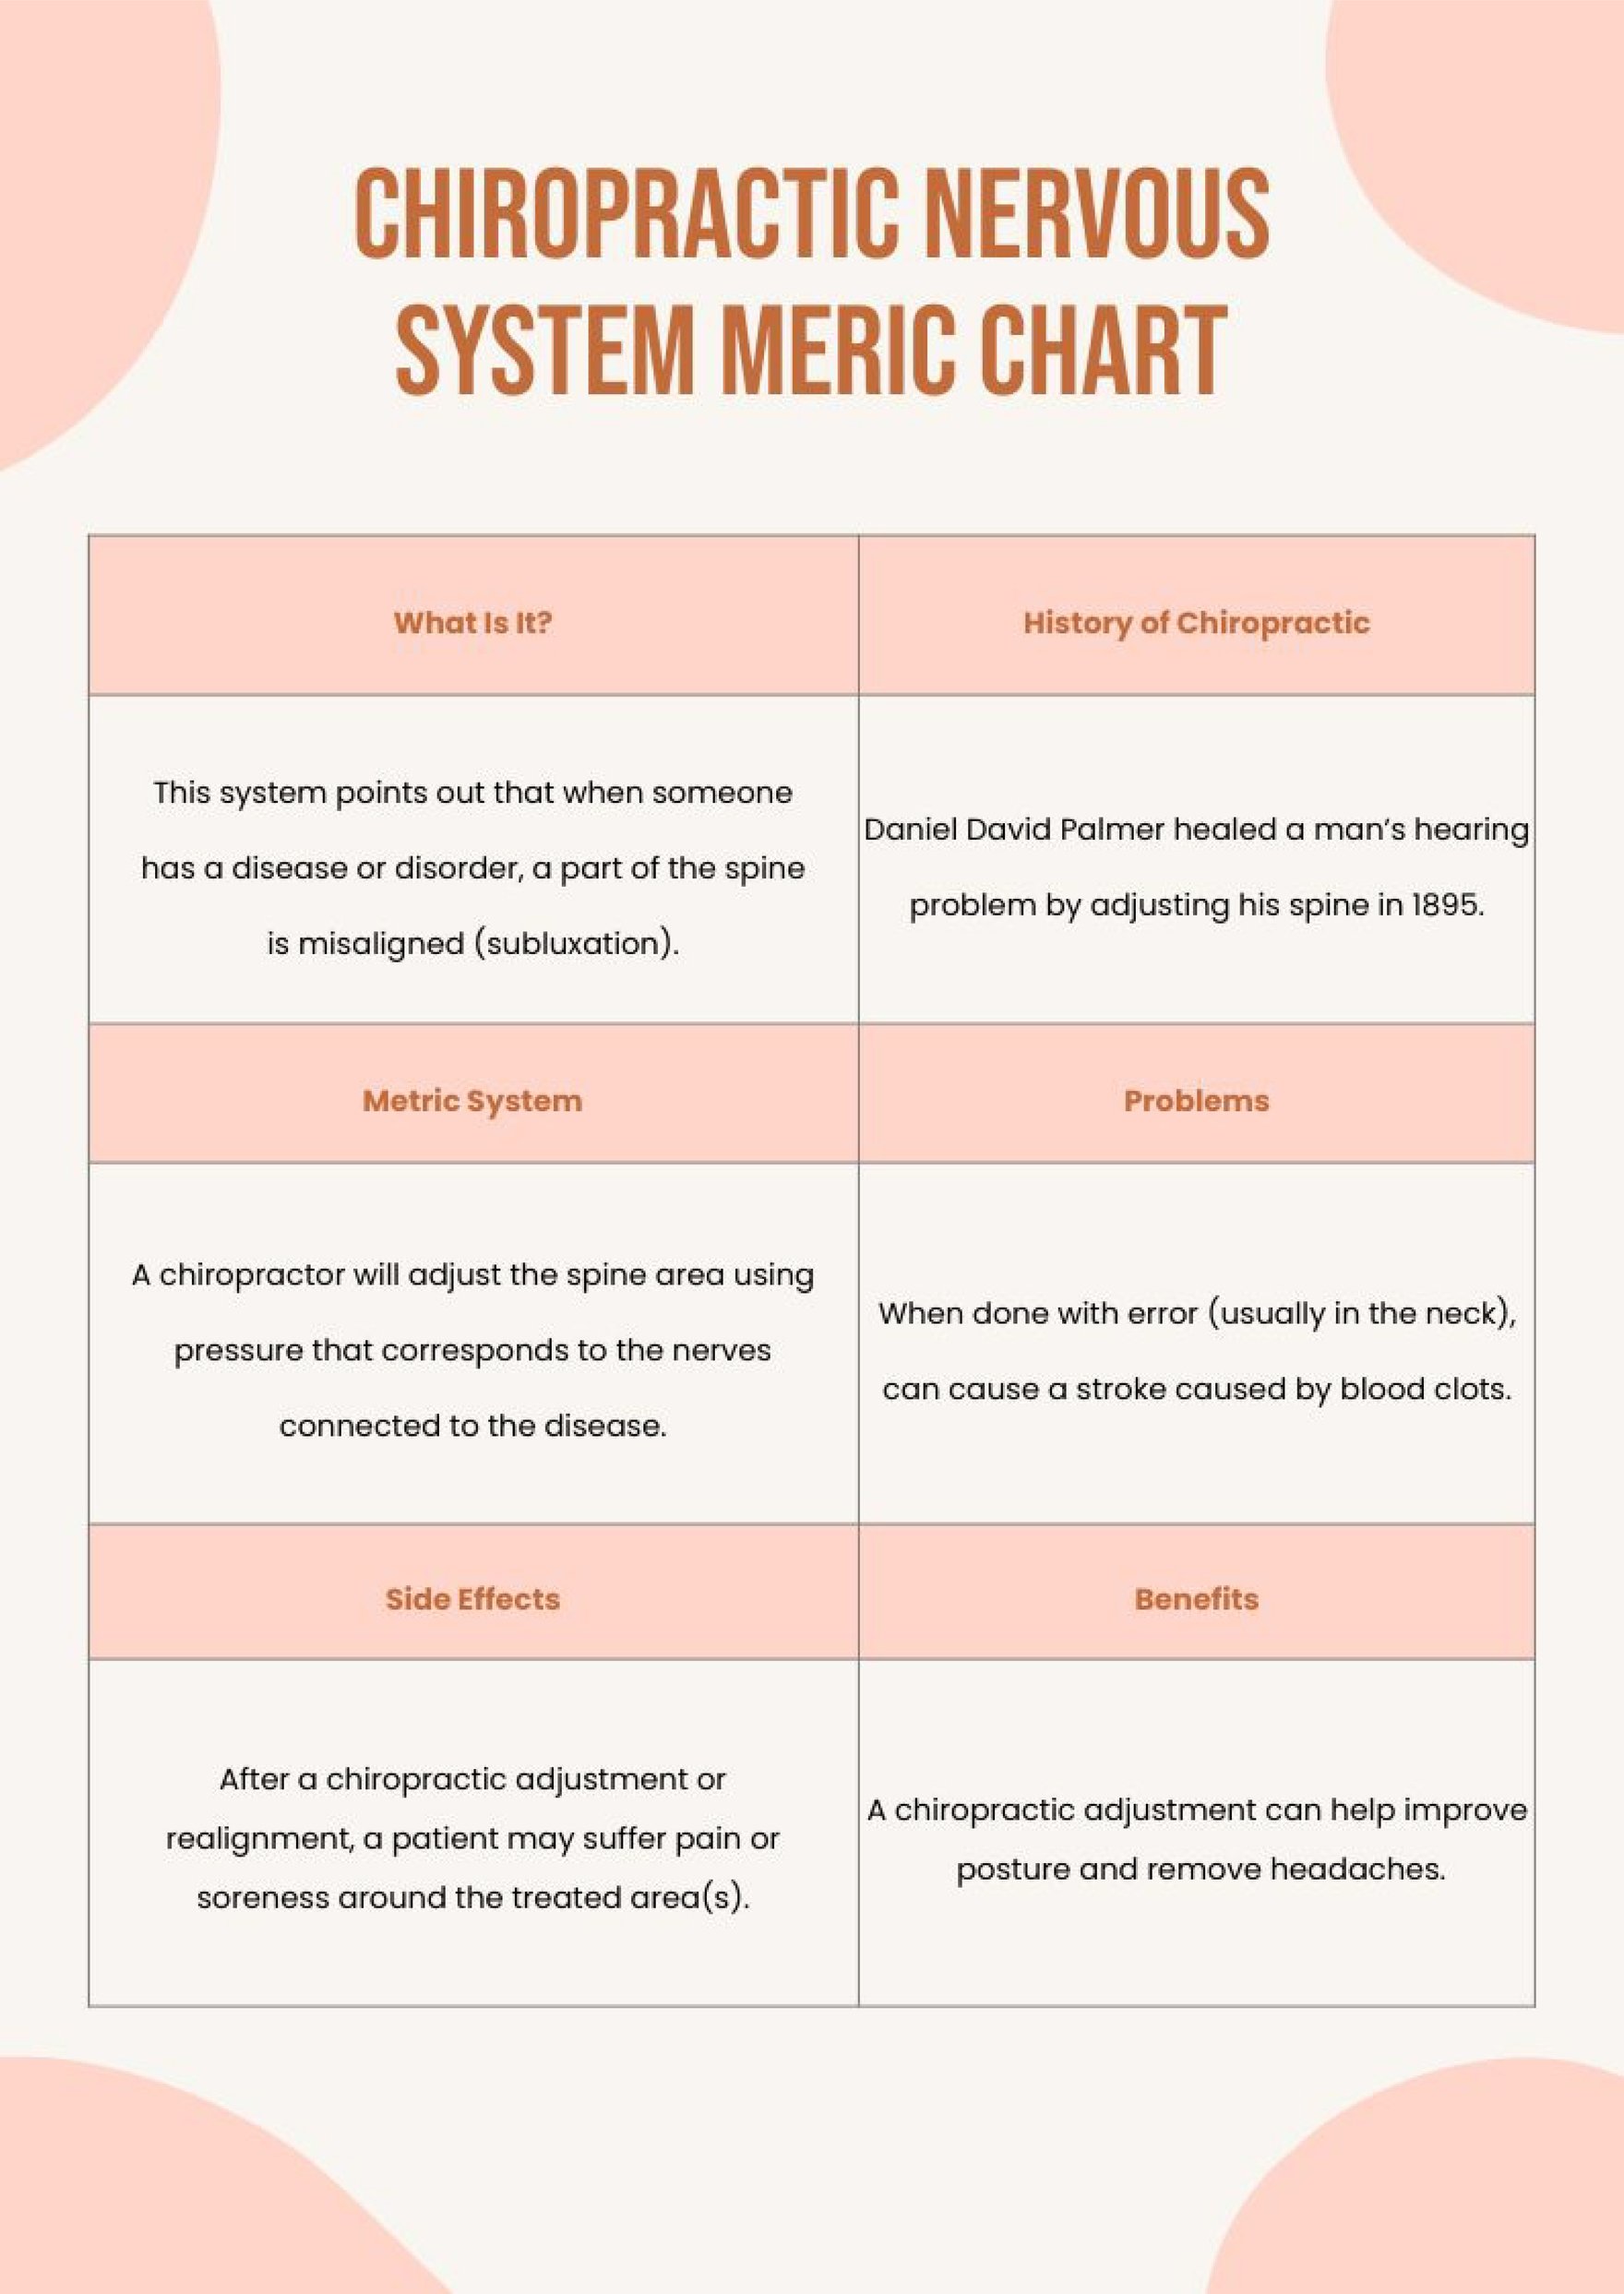 Chiropractic Nervous System Meric Chart